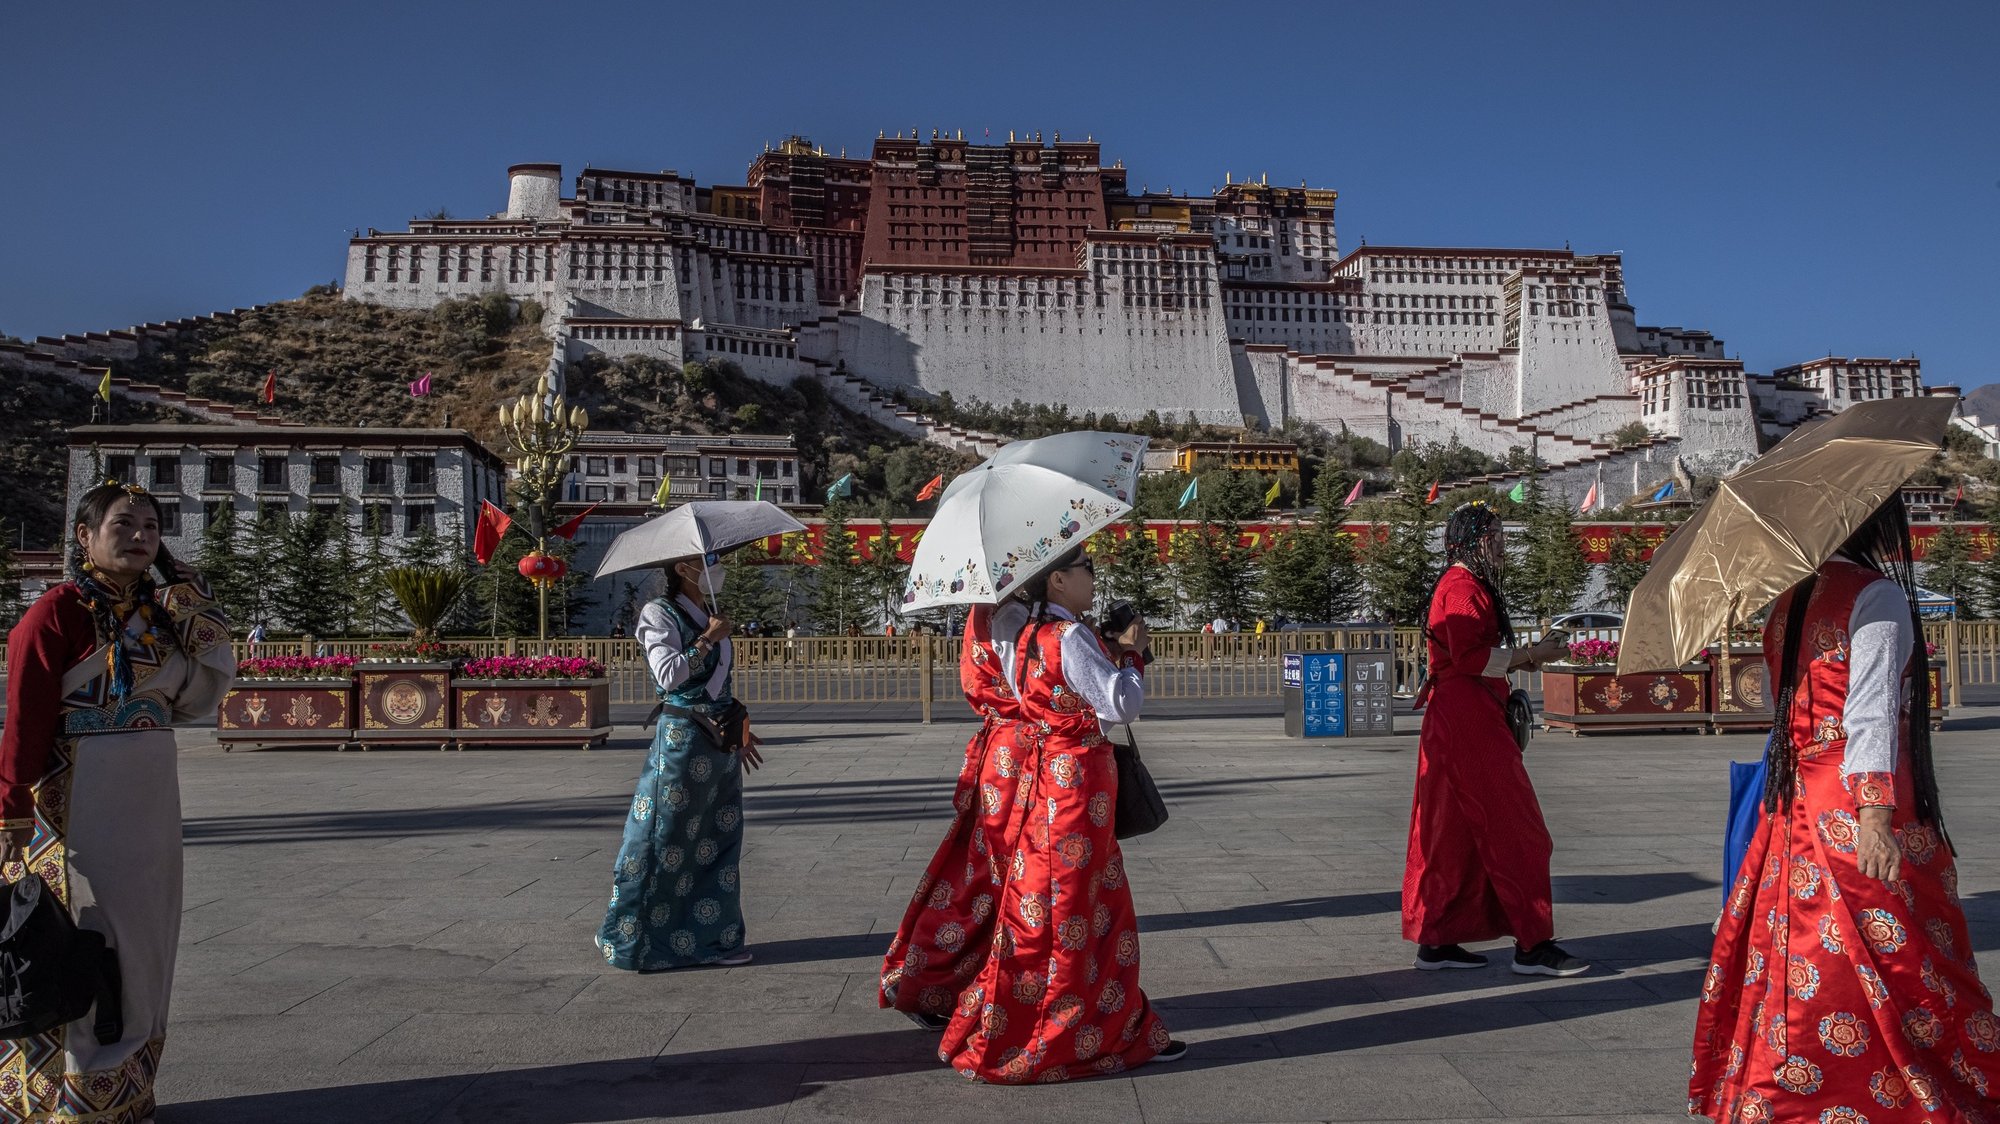 epa08751193 Women visit the square in front of the Potala Palace in Lhasa, Tibet Autonomous Region, China, 15 October 2020 (issued 16 October 2020). The visit to Tibet for journalists is a government-organised media tour focused on a poverty alleviation program. Tibet is considered one of China&#039;s poverty-stricken areas. The Chinese government plans to eradicate extreme poverty by the end of 2020. The famous Potala Palace used to be the main residence of the Dalai Lama but is now preserved as a museum and world heritage site.  EPA/ROMAN PILIPEY